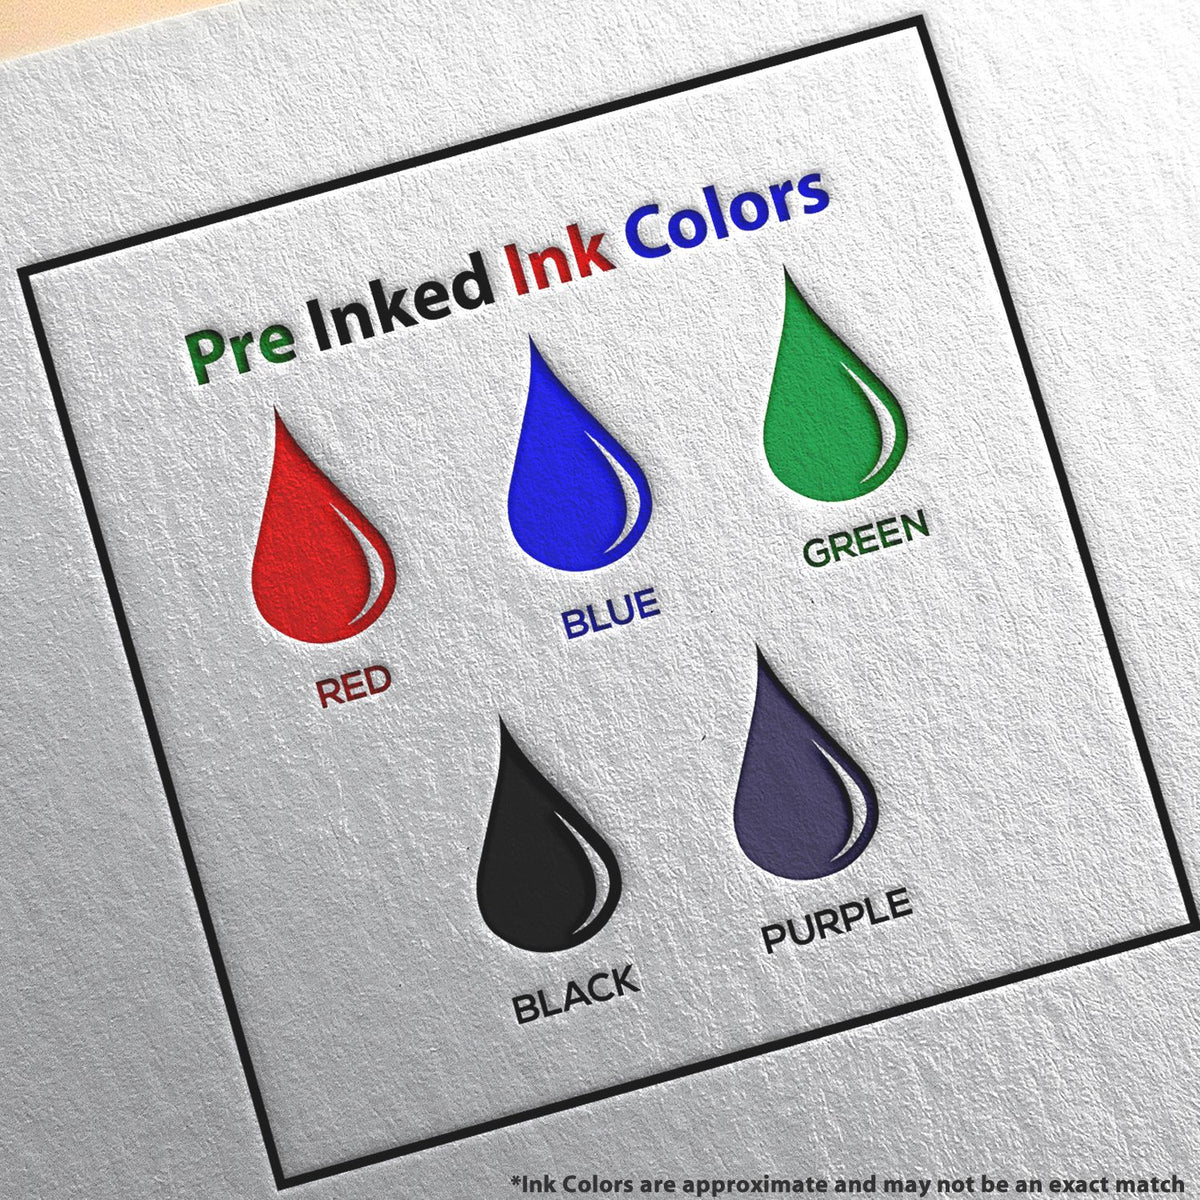 A picture showing the different ink colors or hues available for the PSI Wisconsin Notary Stamp product.